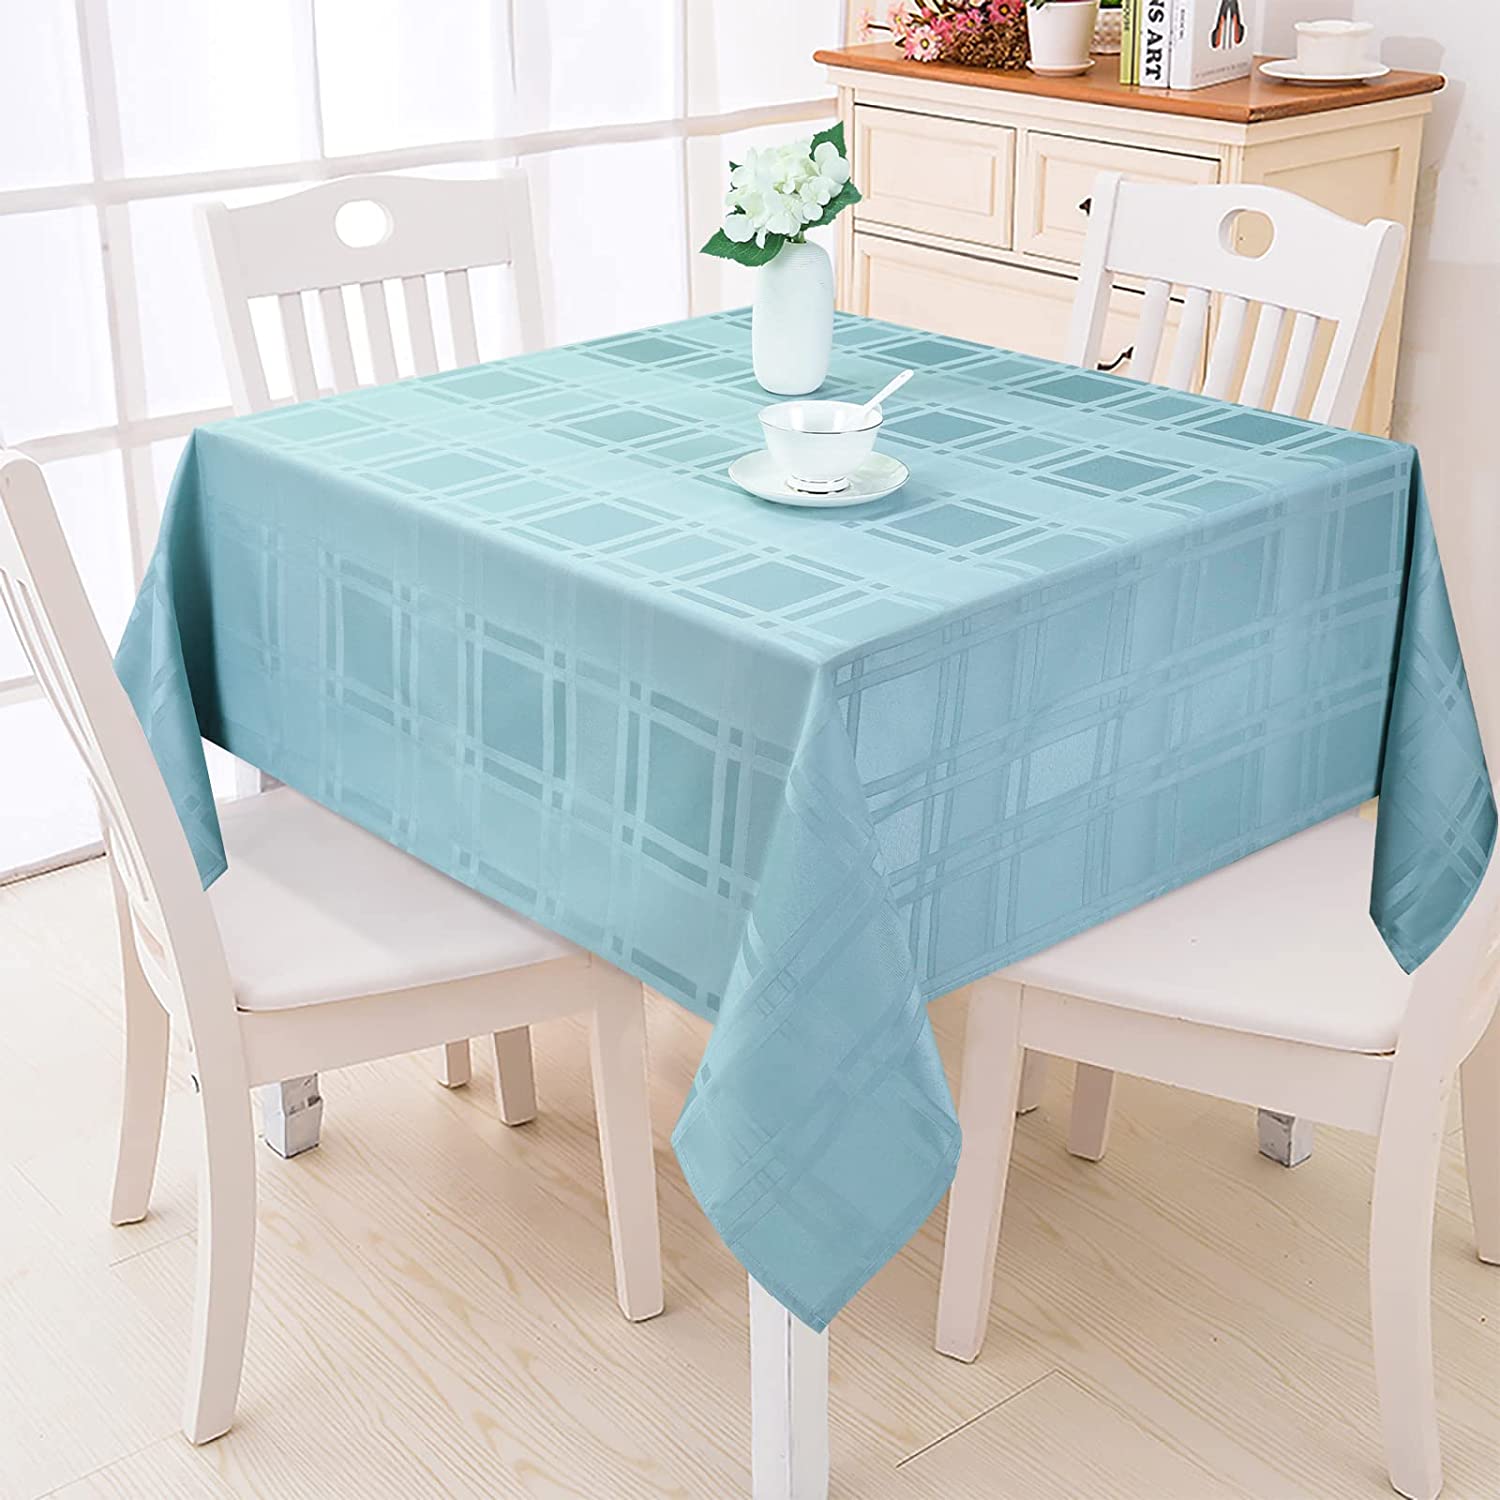 JUCFHY Water-Resistant Polyester Square Tablecloth